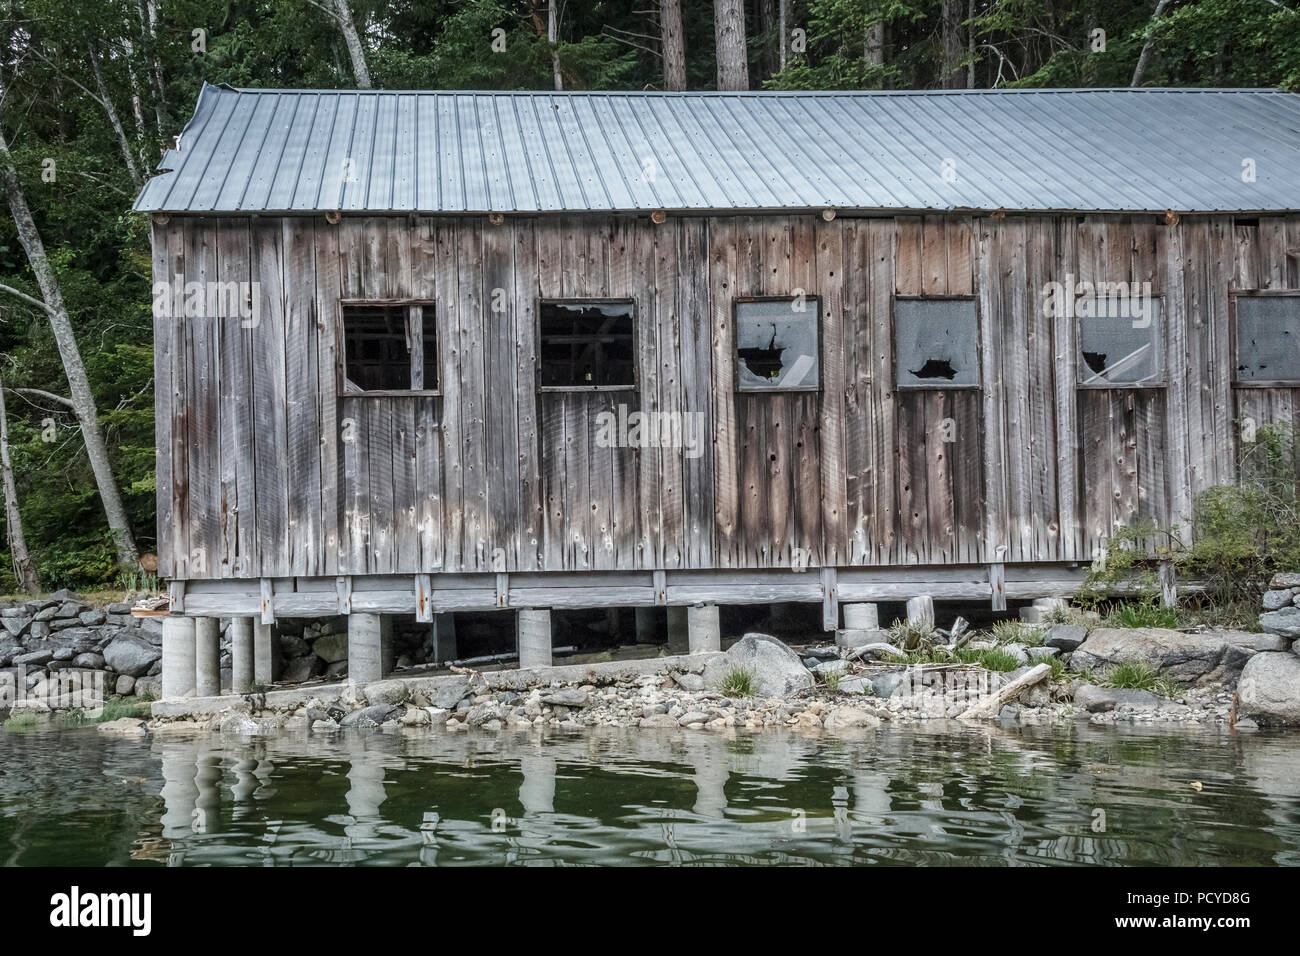 A neglected old wooden shed with concrete supports, metal roof and  glass missing from its windows extends out from shore over the intertidal area. Stock Photo